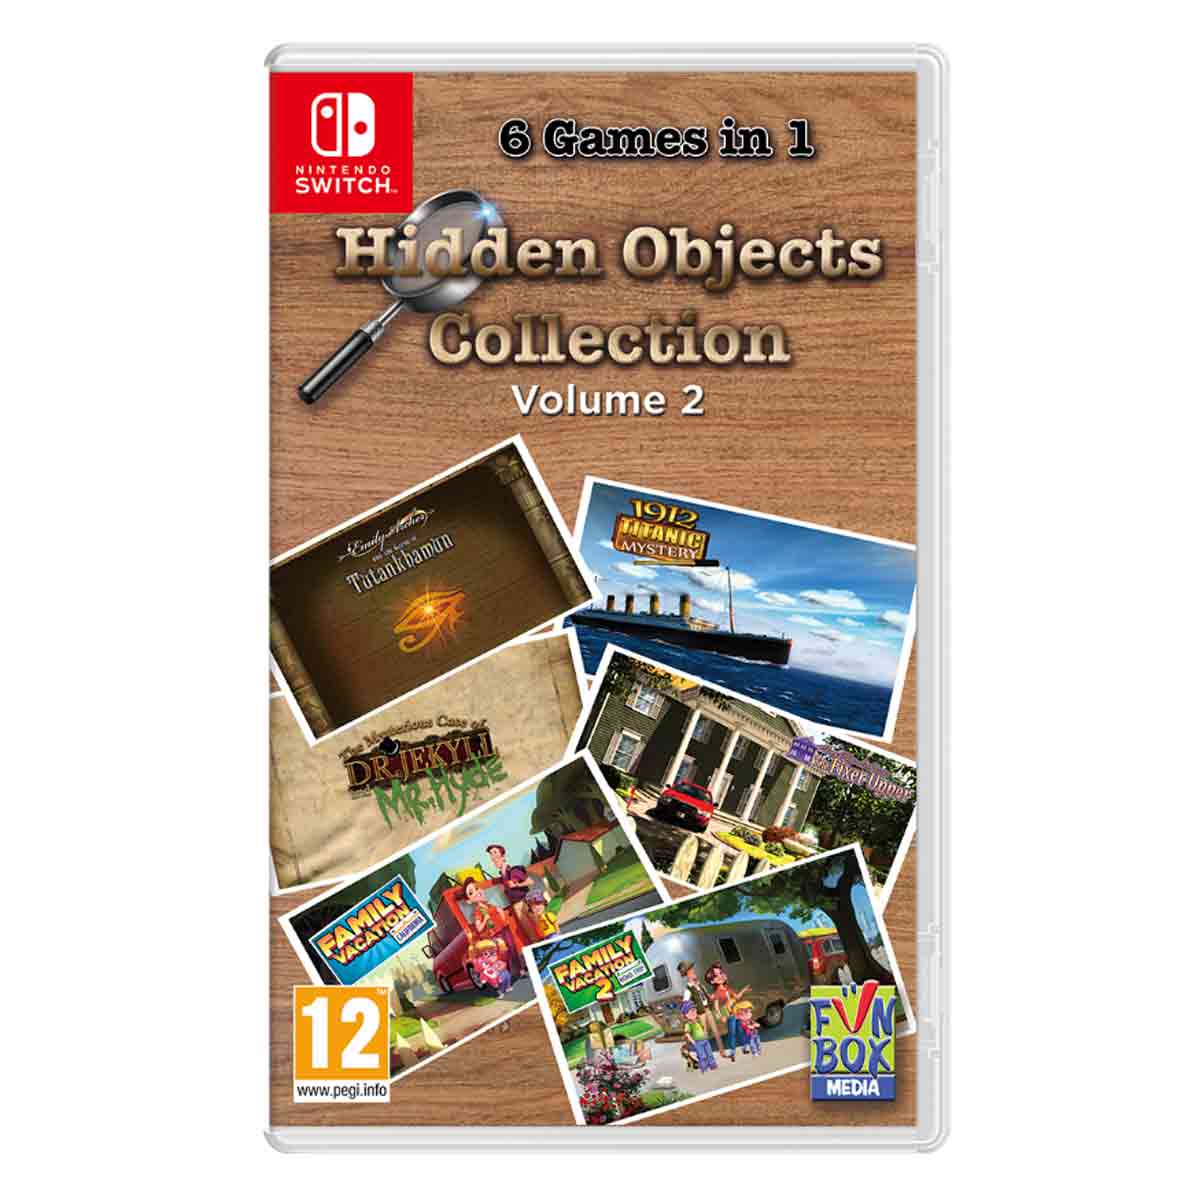 Photos - Game Funbox Media Hidden Objects Collection Volume 2 